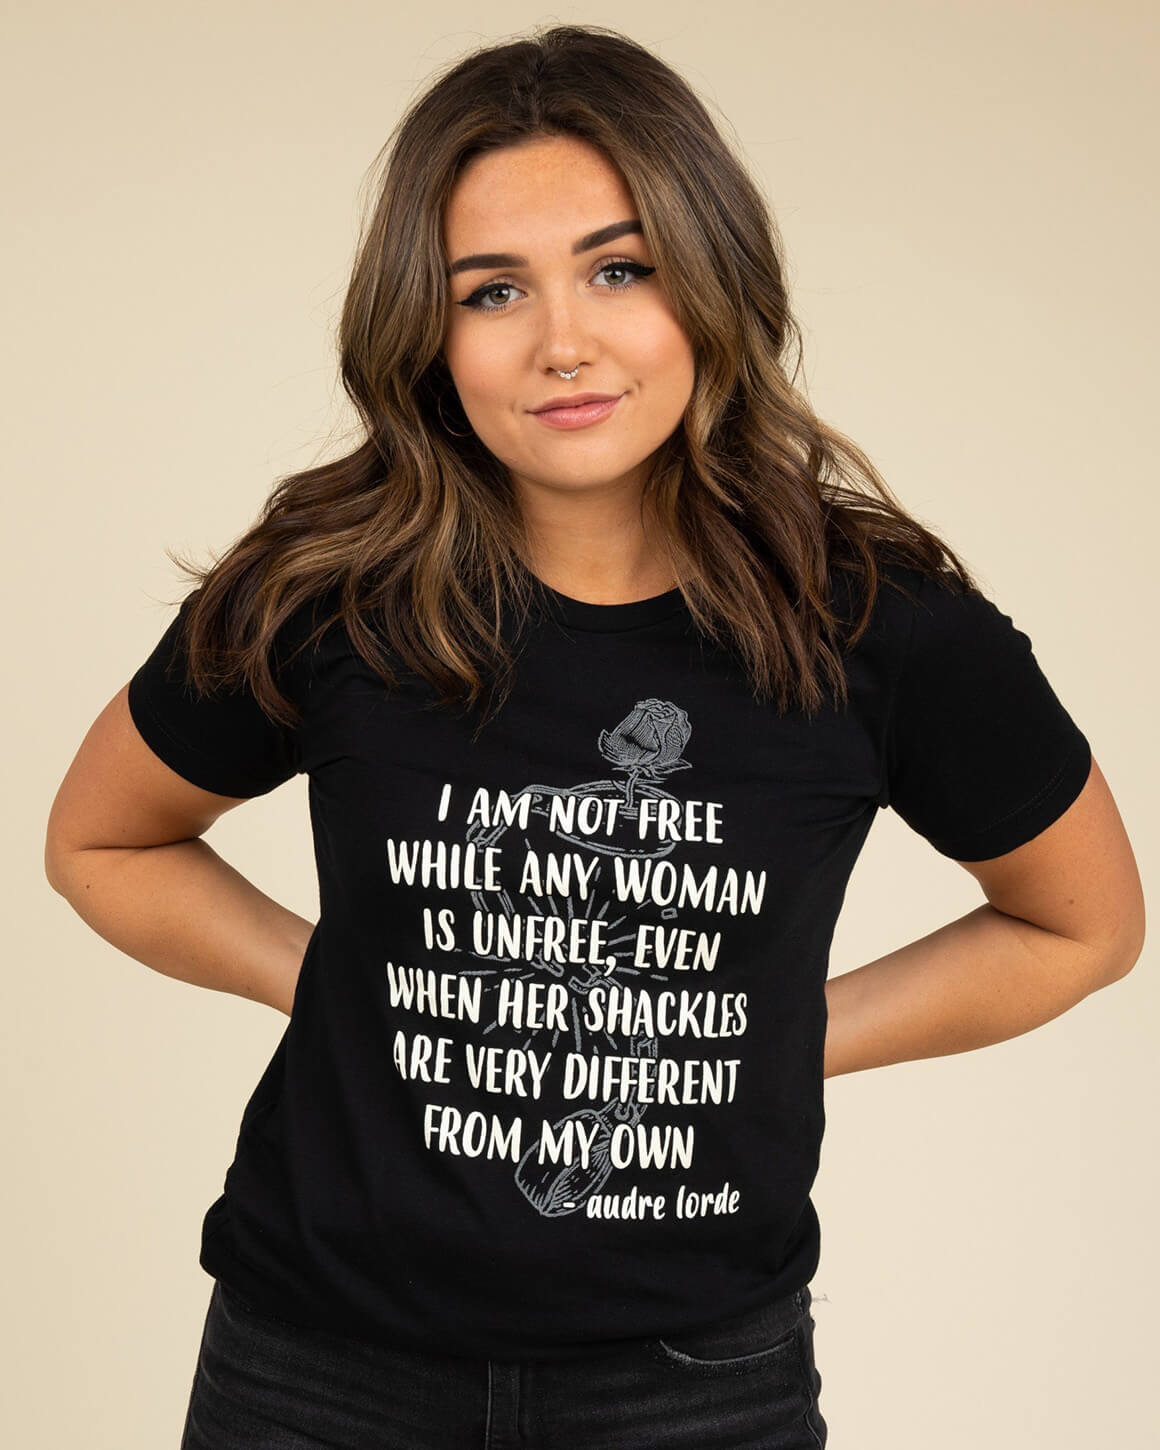 I am not free while any woman is unfree Audre Lorde shirt